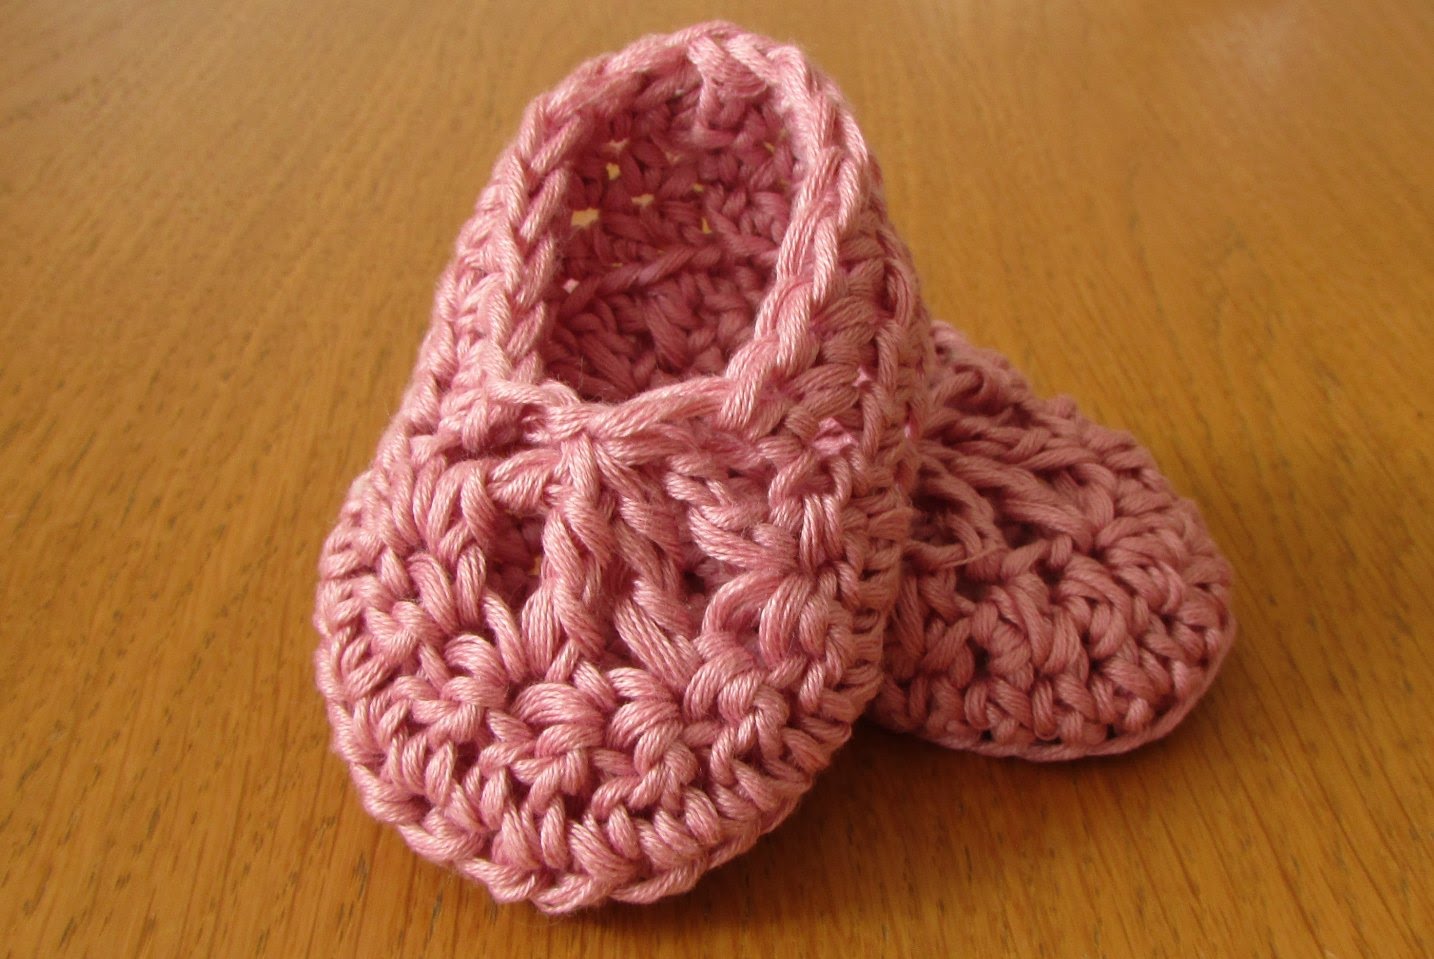 easy crochet baby booties easy crochet baby ballet slippers - dainty crochet baby booties / shoes -  youtube KOGWRNY